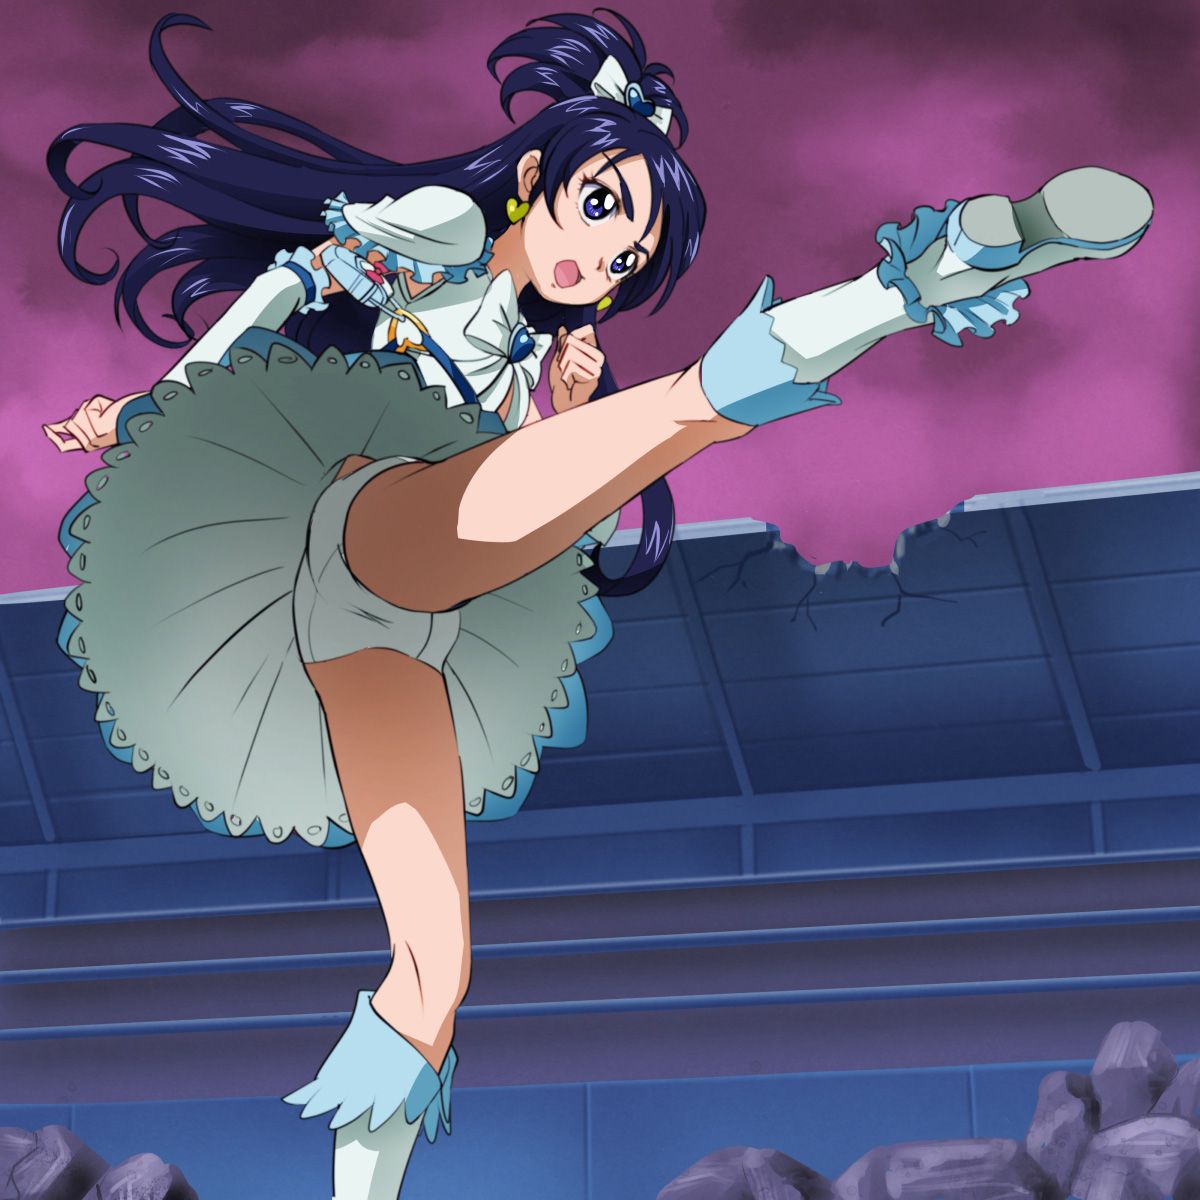 [PreCure] Secondary erotic images of female characters 5 50 photos 17